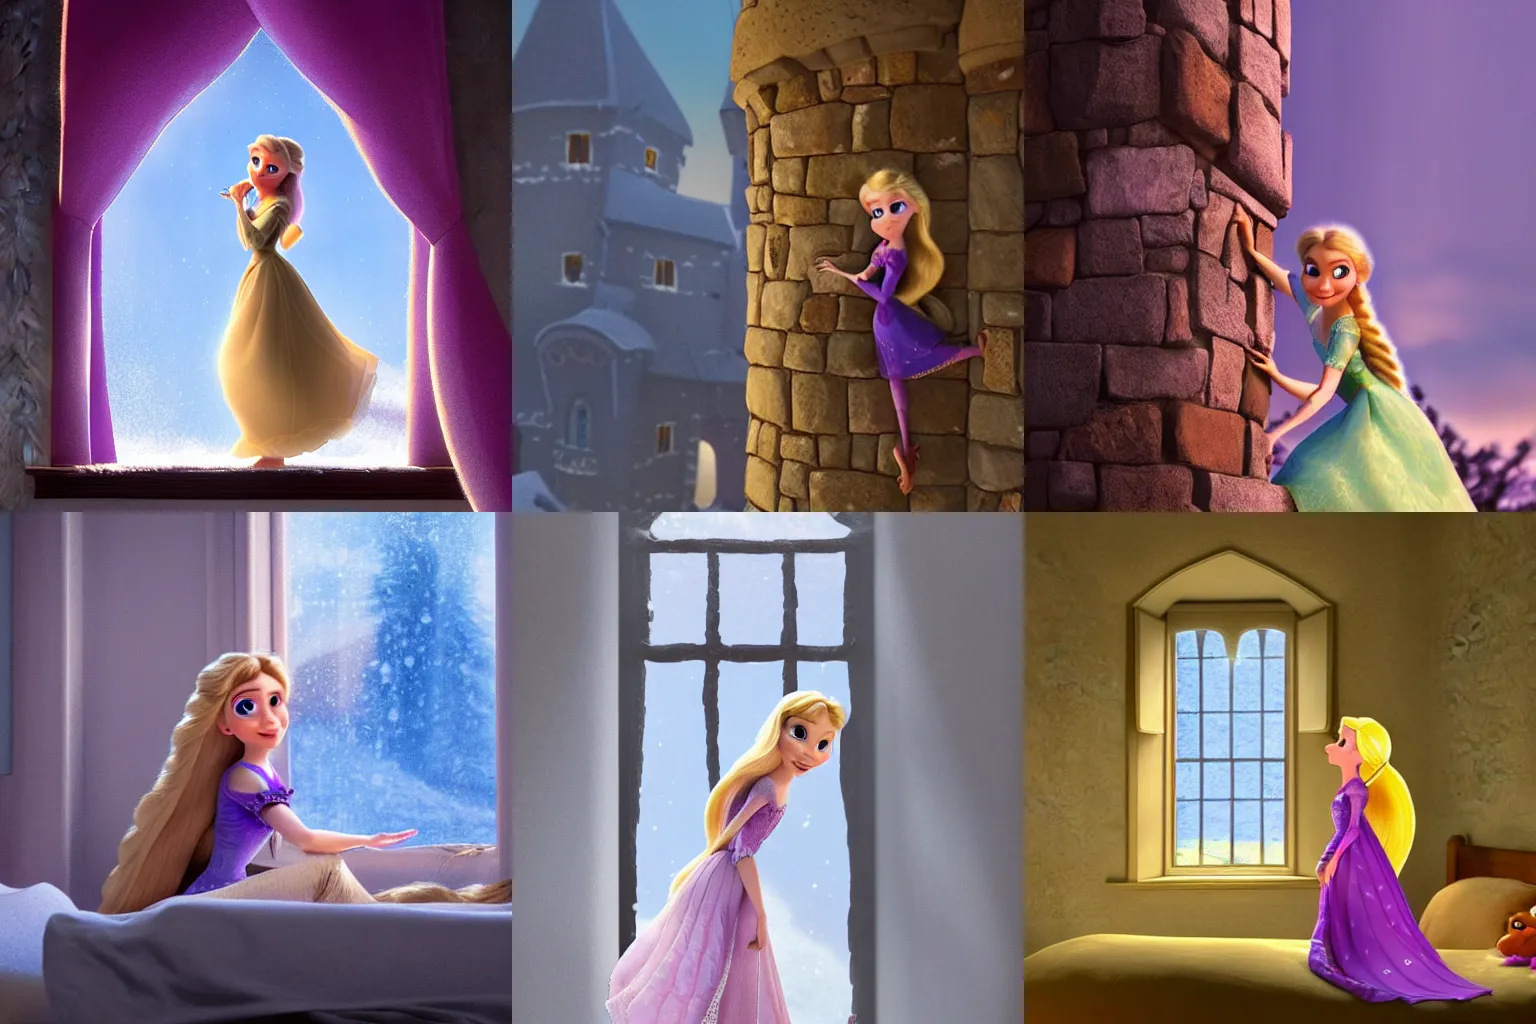 Prompt: Pixar still, Rapunzel stands in an empty stone tower bedroom, cold day outside, snow comes in through open window, highly detailed, intriguing lighting